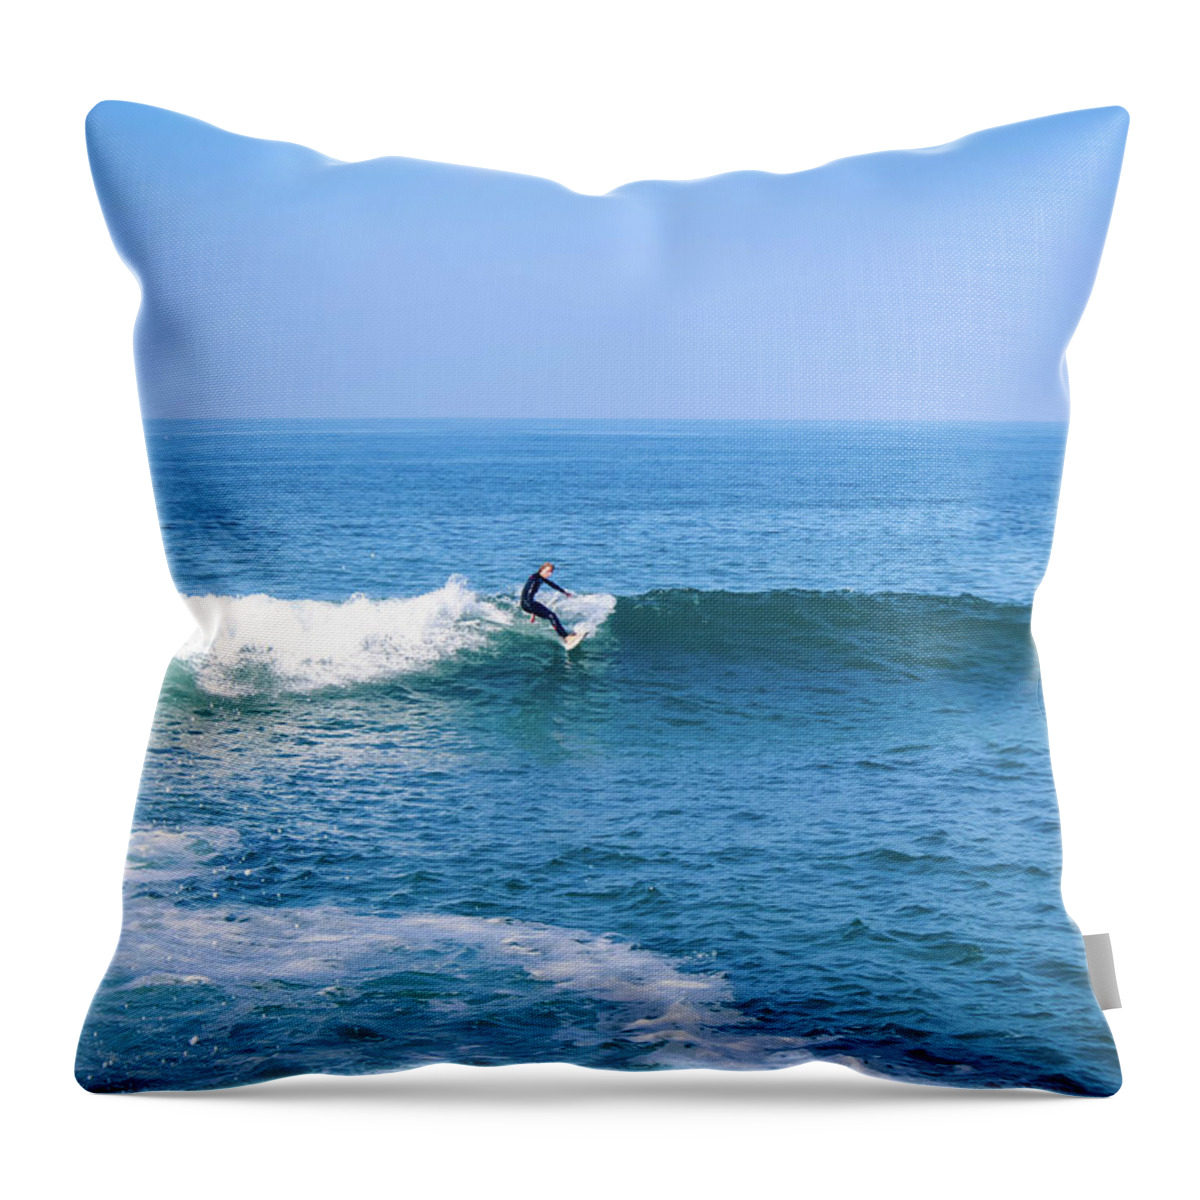 Surfer Throw Pillow featuring the photograph Shredder by Alison Frank